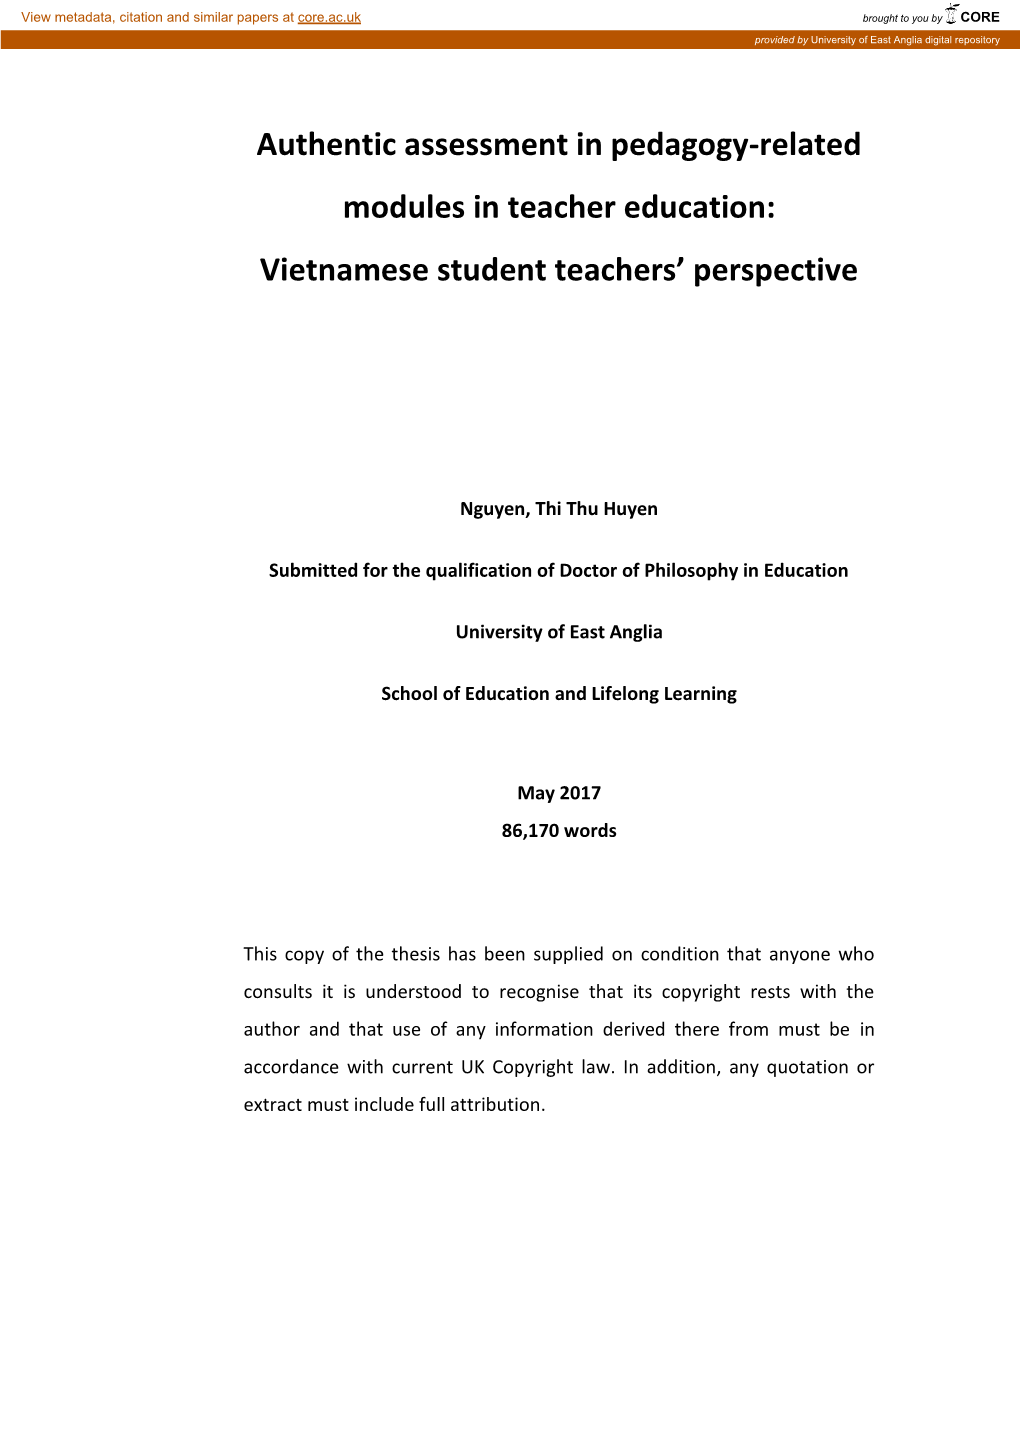 Authentic Assessment in Pedagogy-Related Modules in Teacher Education: Vietnamese Student Teachers’ Perspective